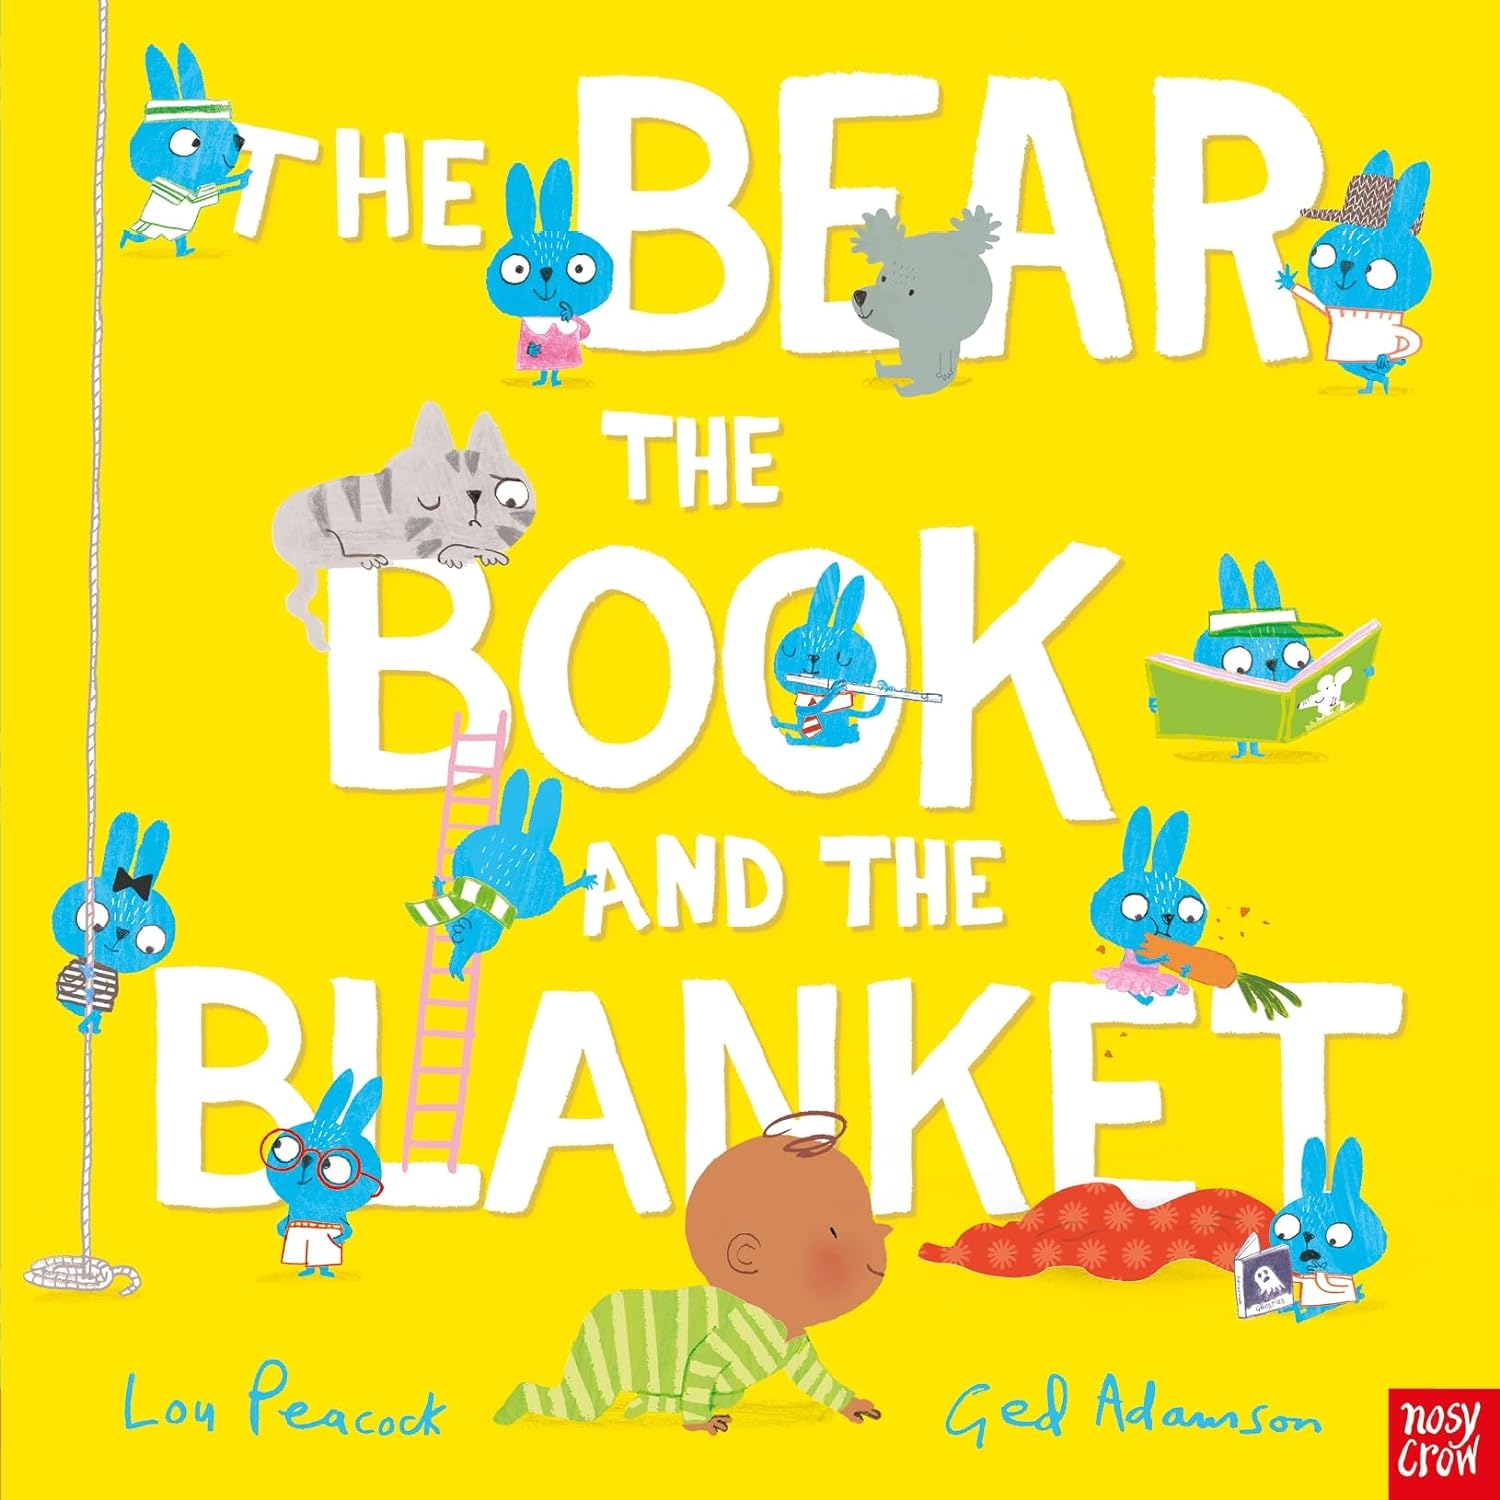 The Bear : The Book And The Blanket